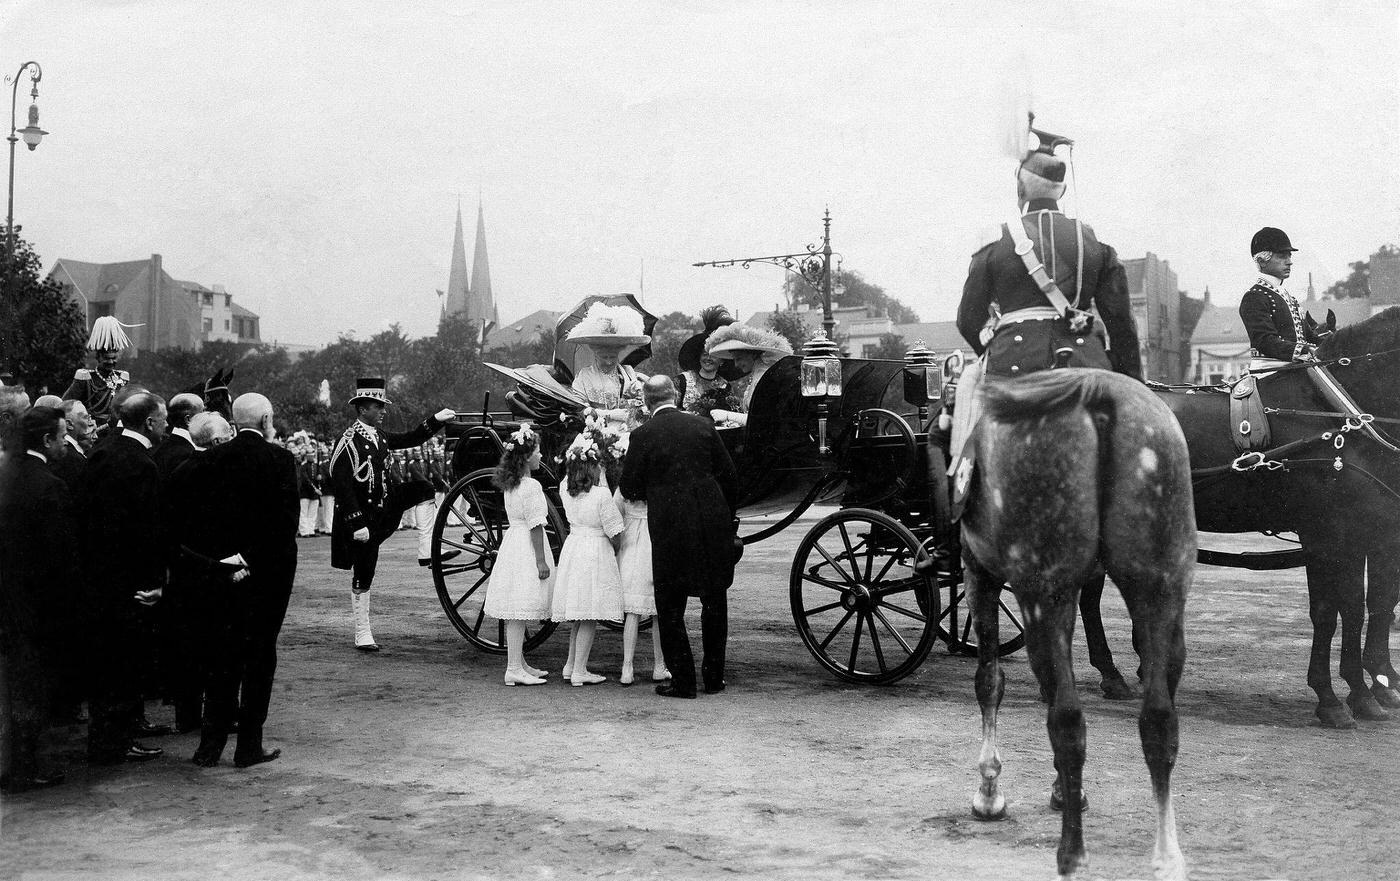 Arrival of Empress Auguste Viktoria of Germany and Queen of Prussia with her princesses in Hamburg-Altona, 1911